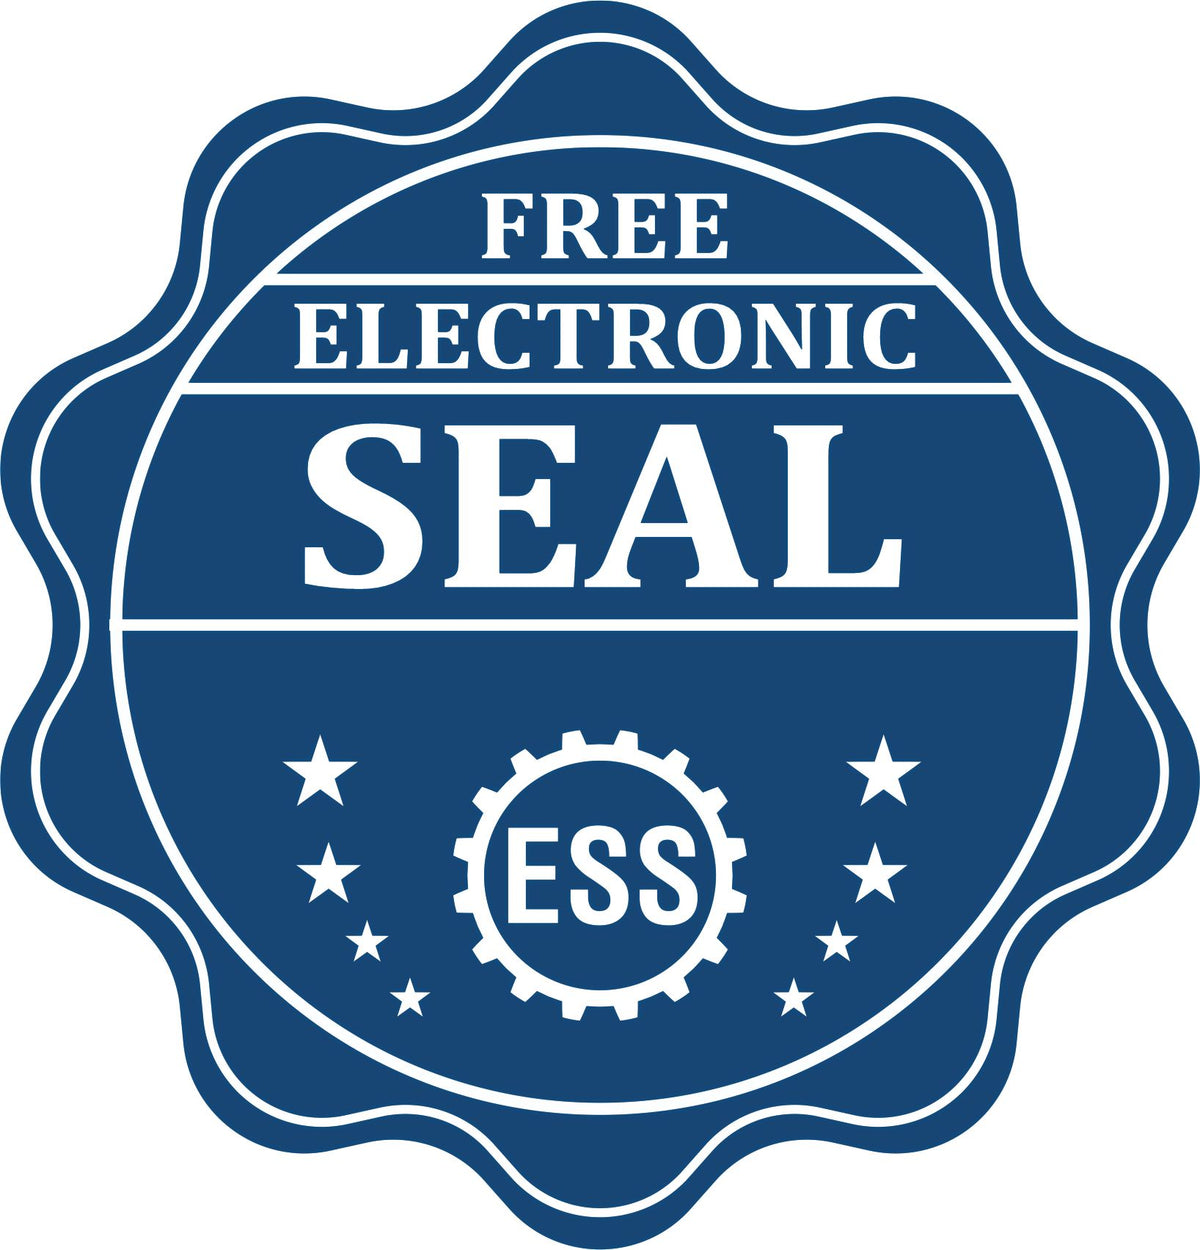 A badge showing a free electronic seal for the New Mexico Engineer Desk Seal with stars and the ESS gear on the emblem.